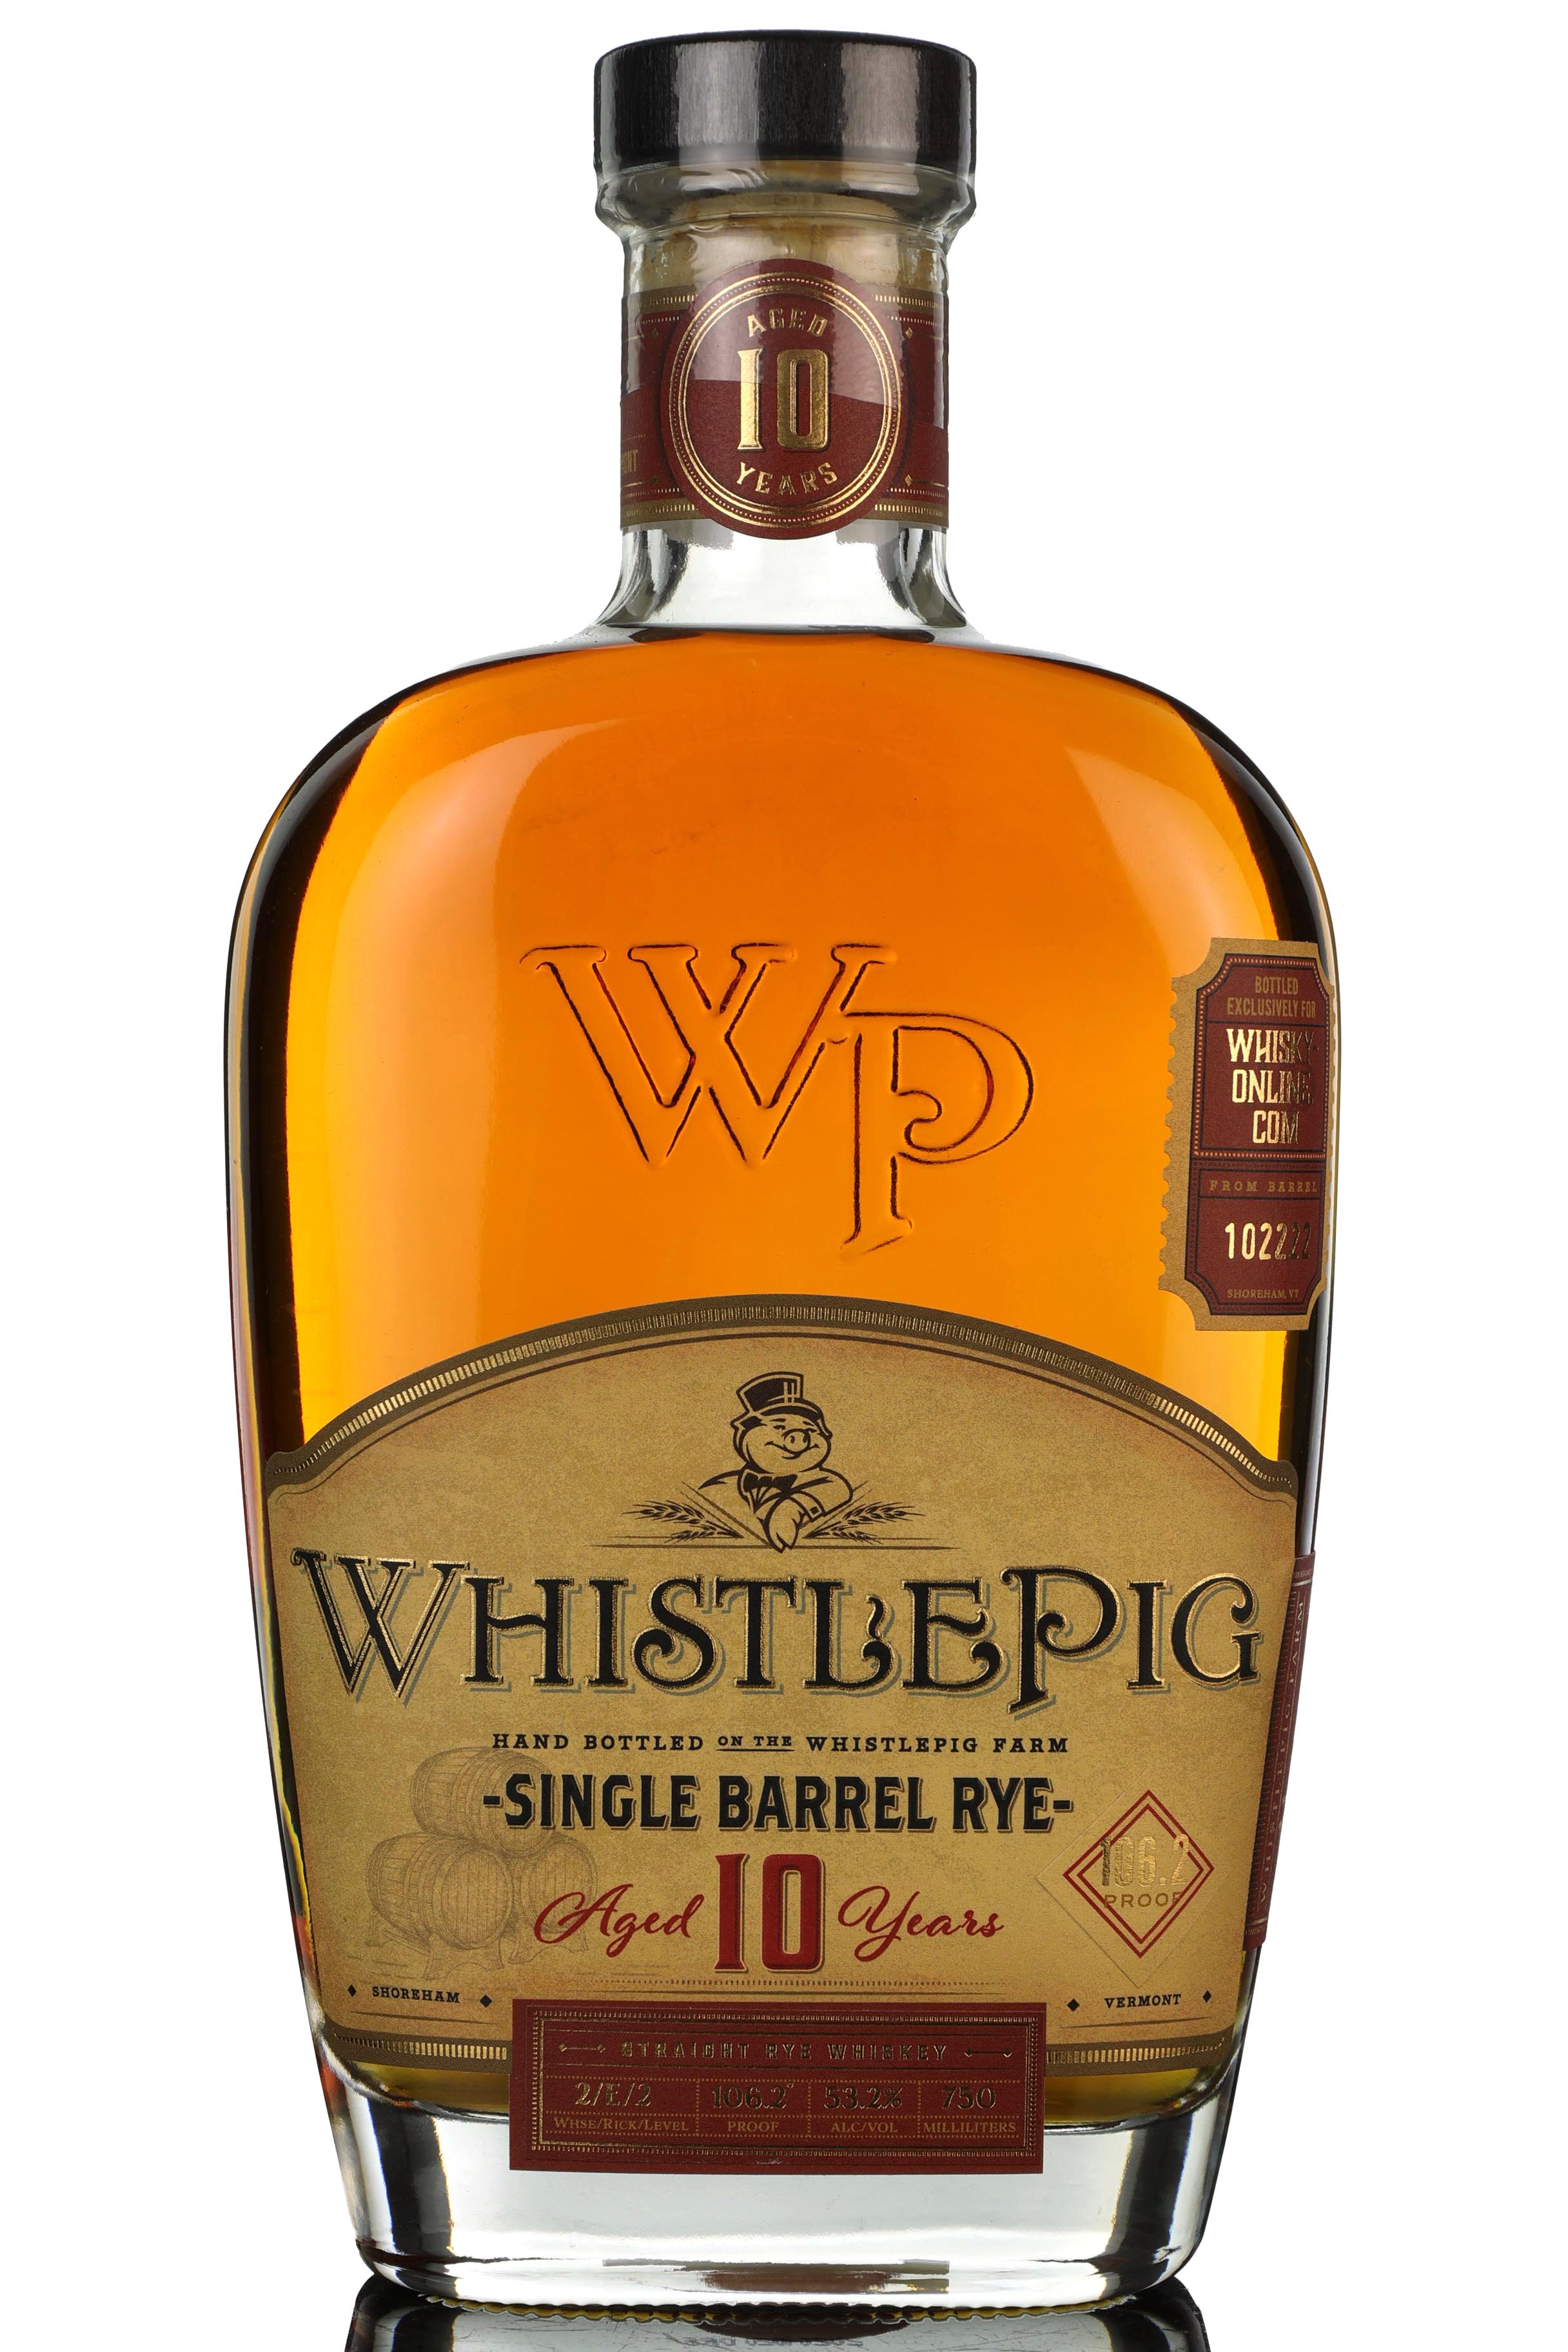 WhistlePig 10 Year Old - Single Barrel 102222 - 2020 Release - Whisky-Online Exclusive